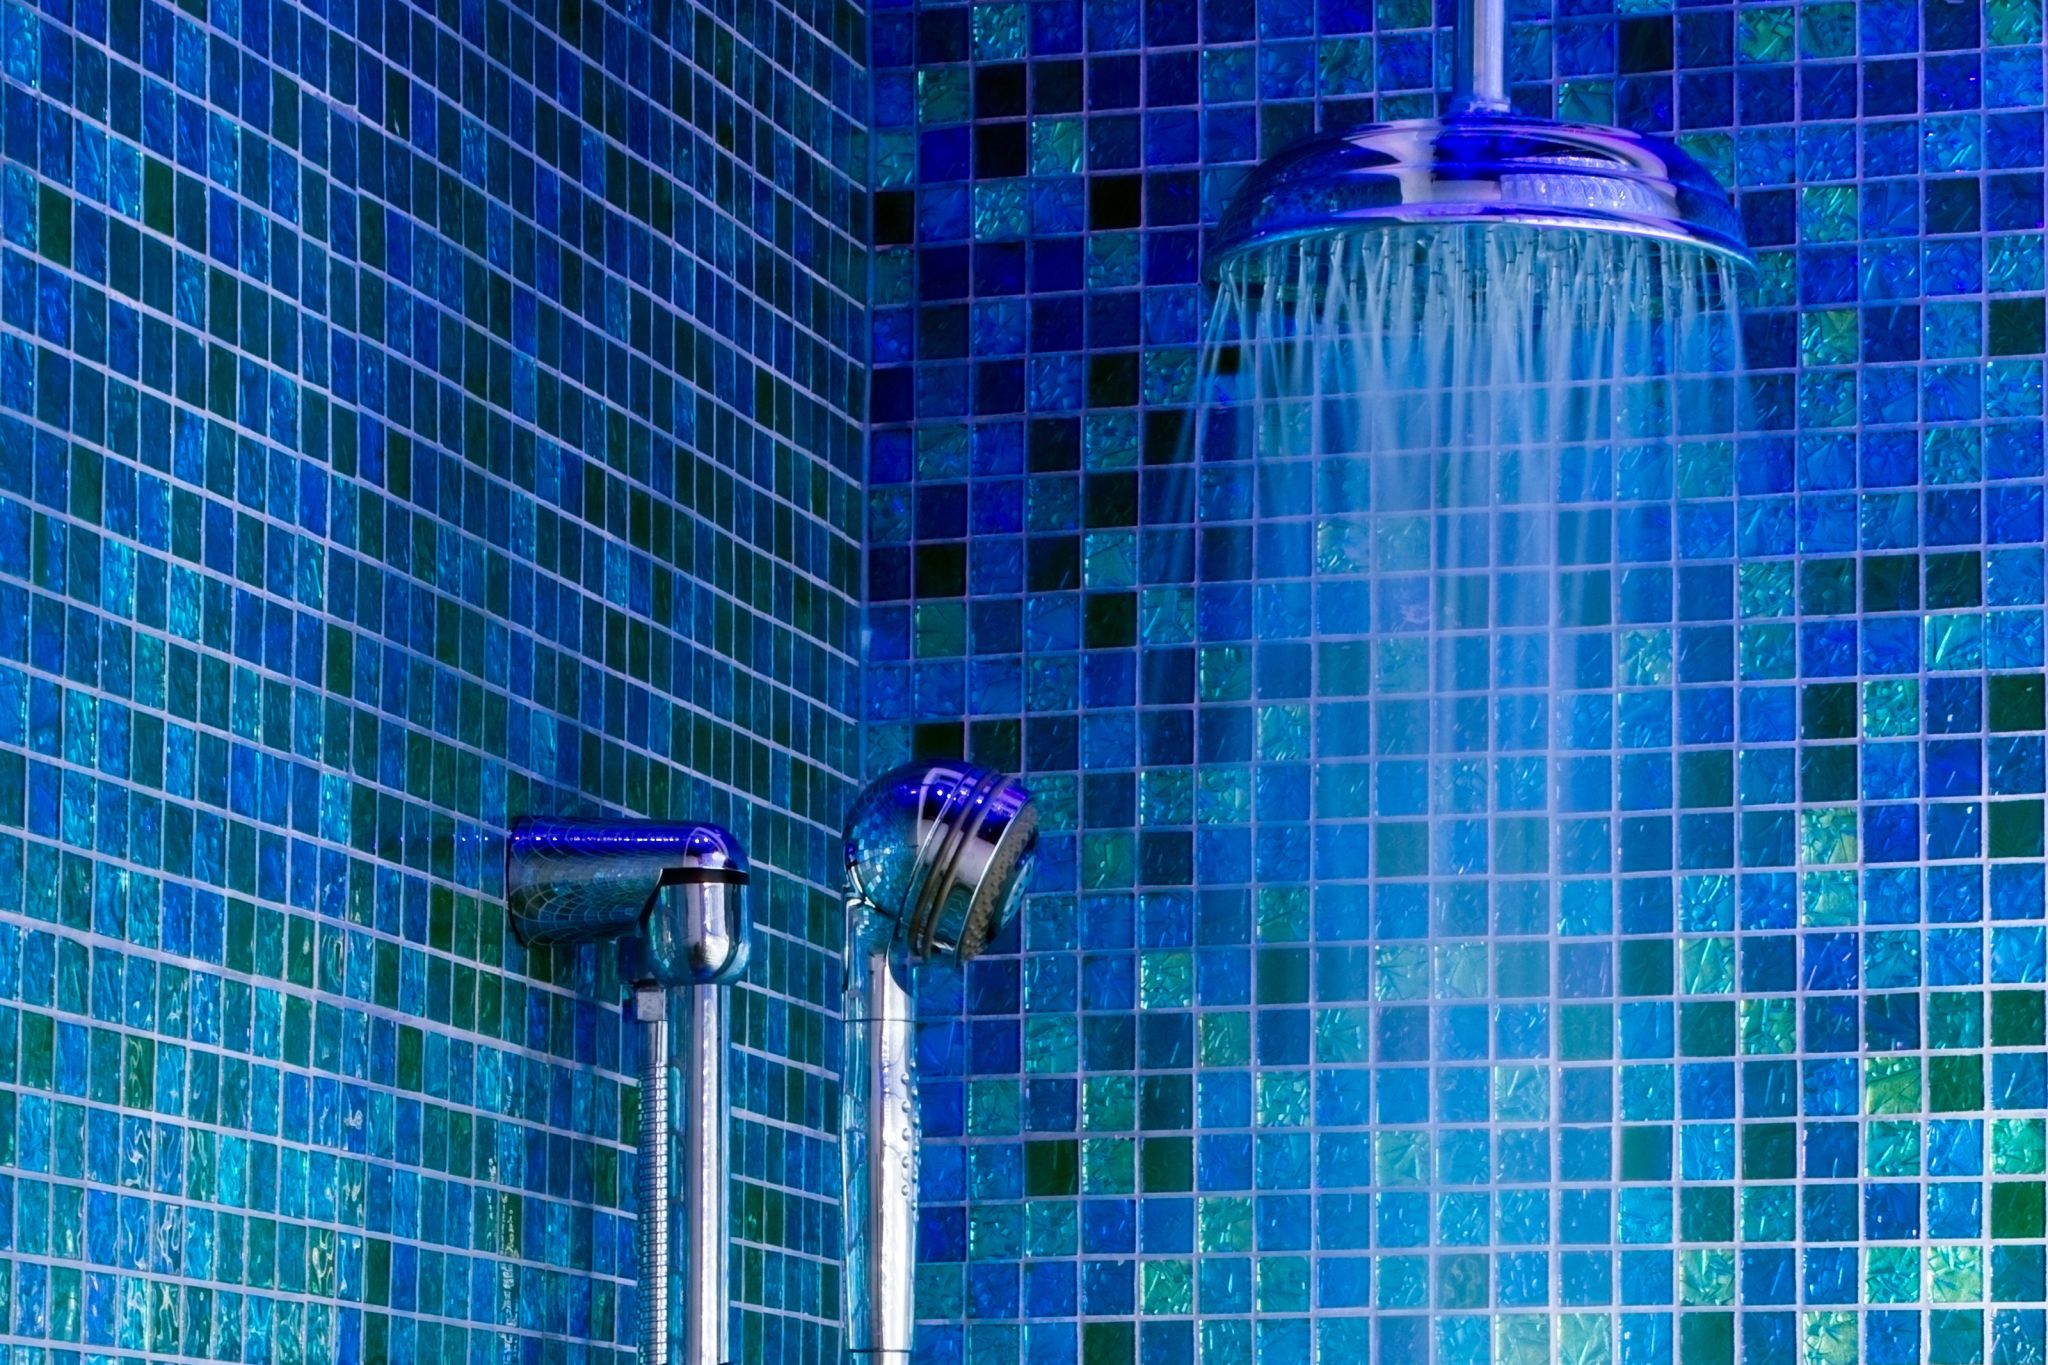 Vibrant blue and green tiles in a shower with handheld head and water pouring from a rain shower head